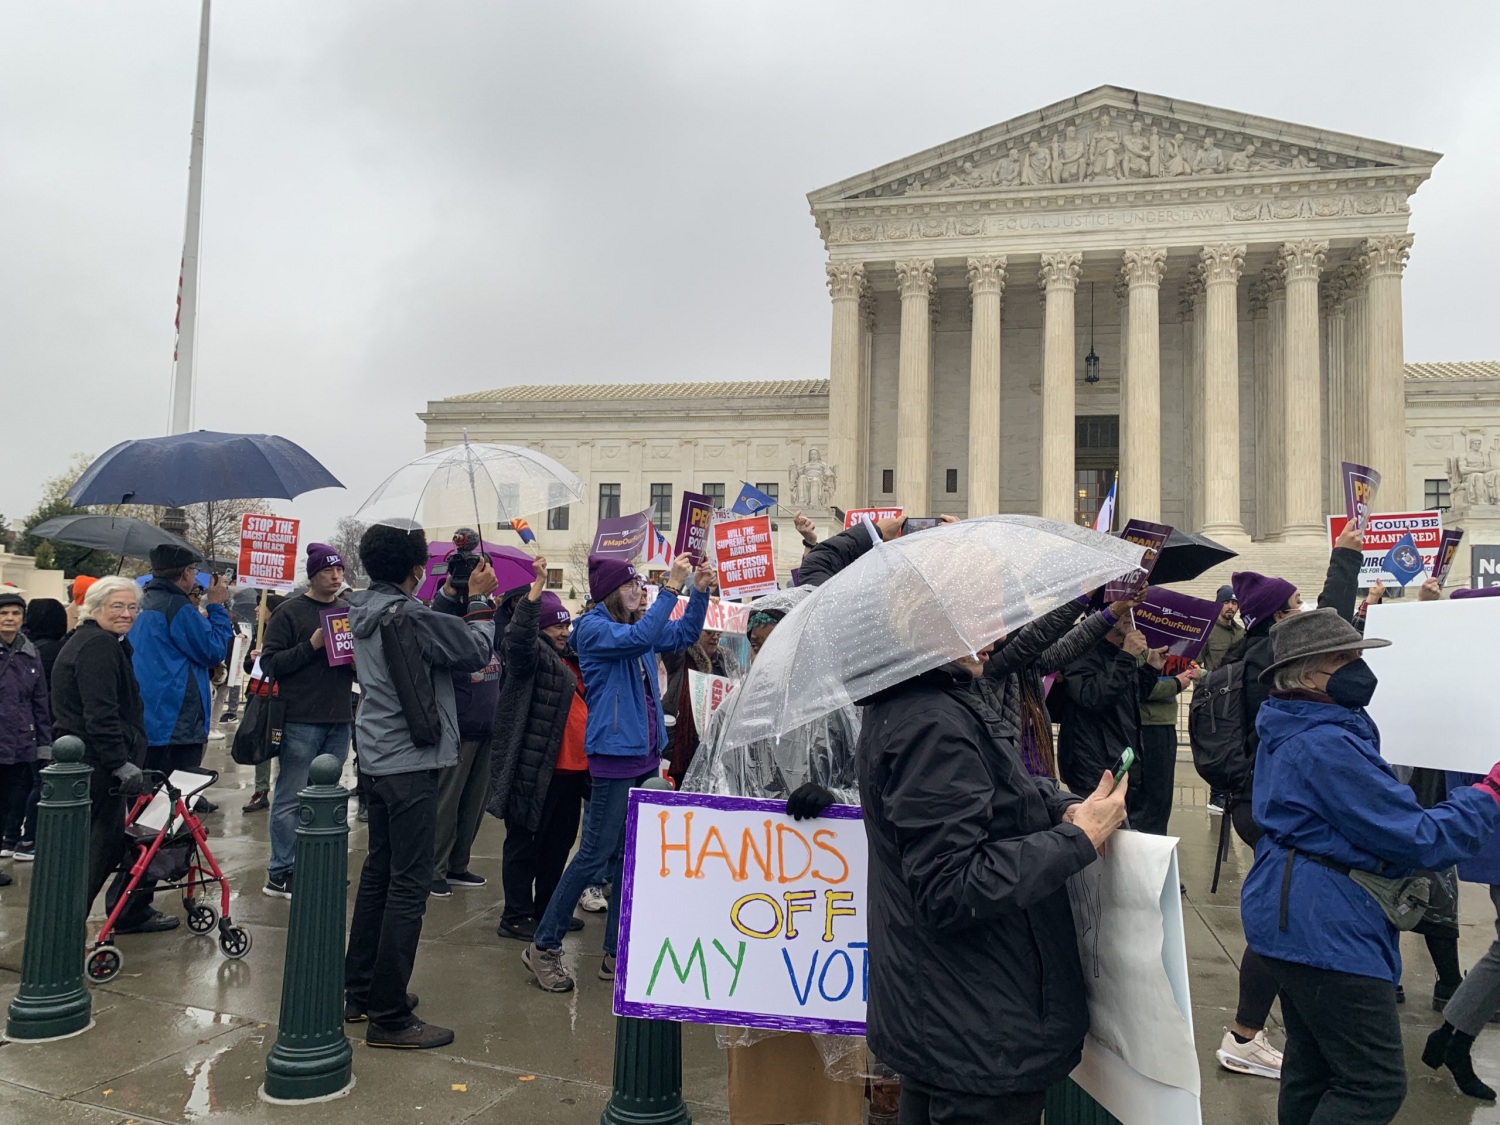 A crowd gathers outside the Supreme Court holding umbrellas and signs. One sign reads, "Hands off my vote"